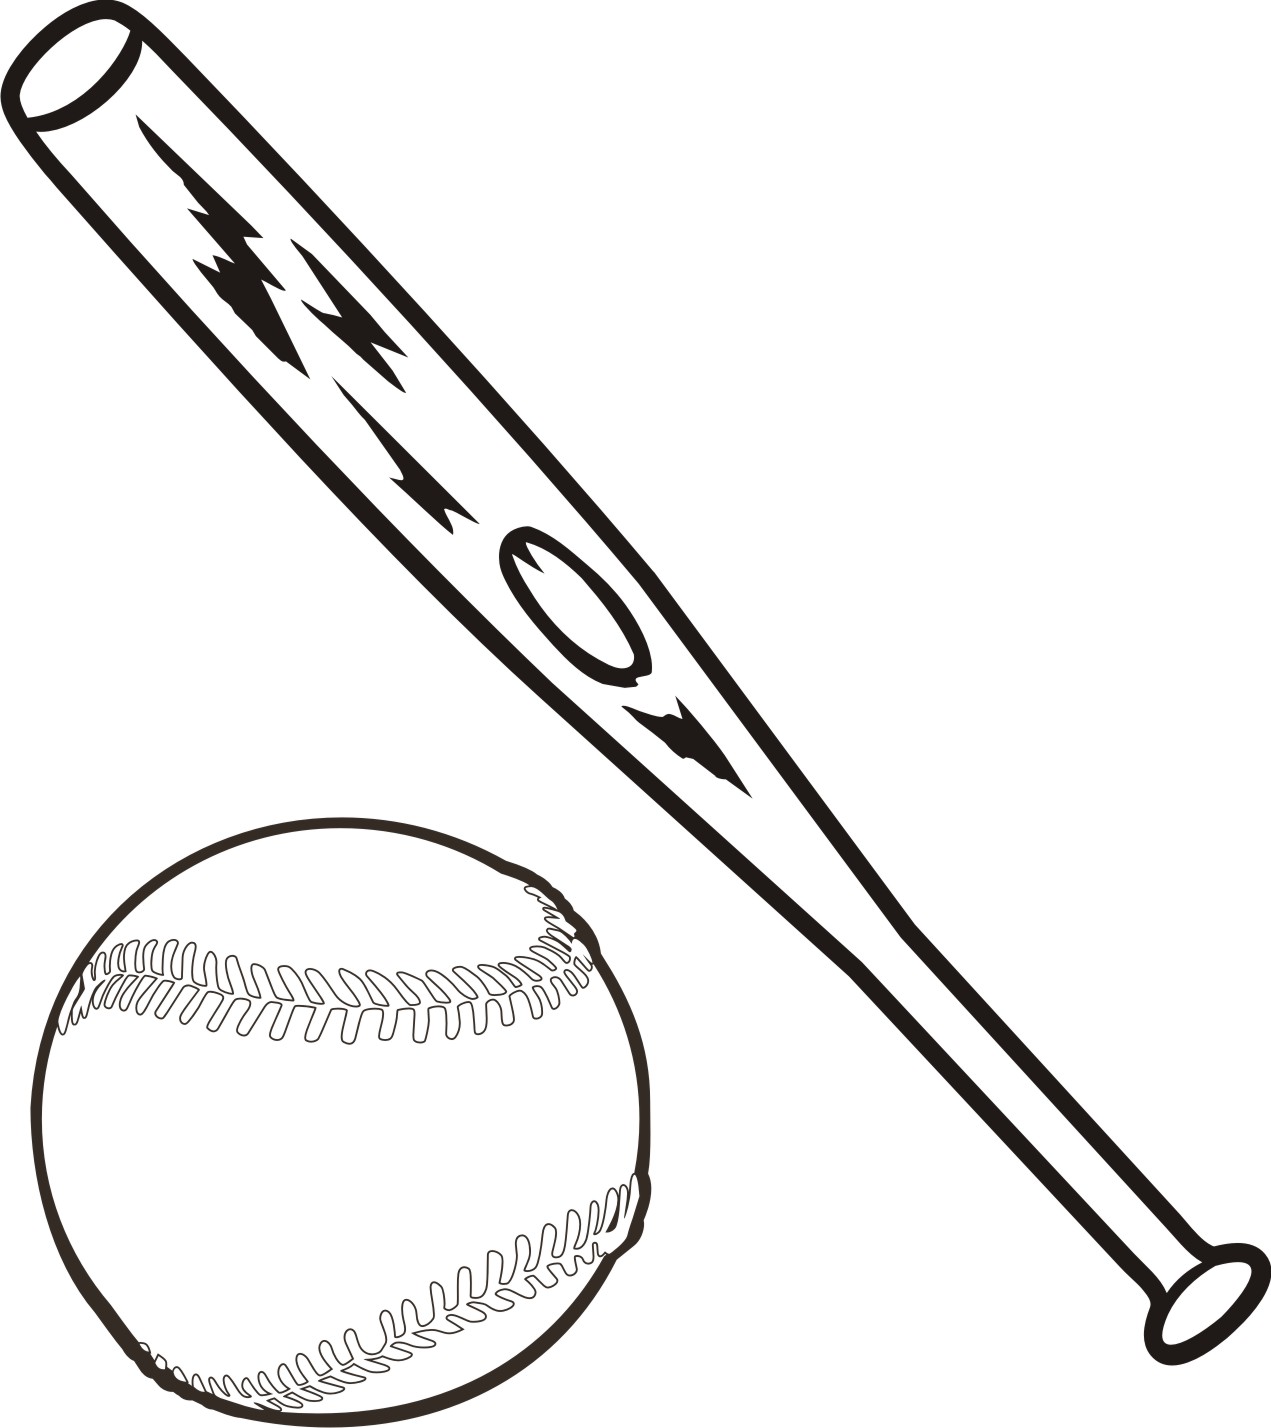 Pictures Of Baseball Bats And Balls - Clipart library